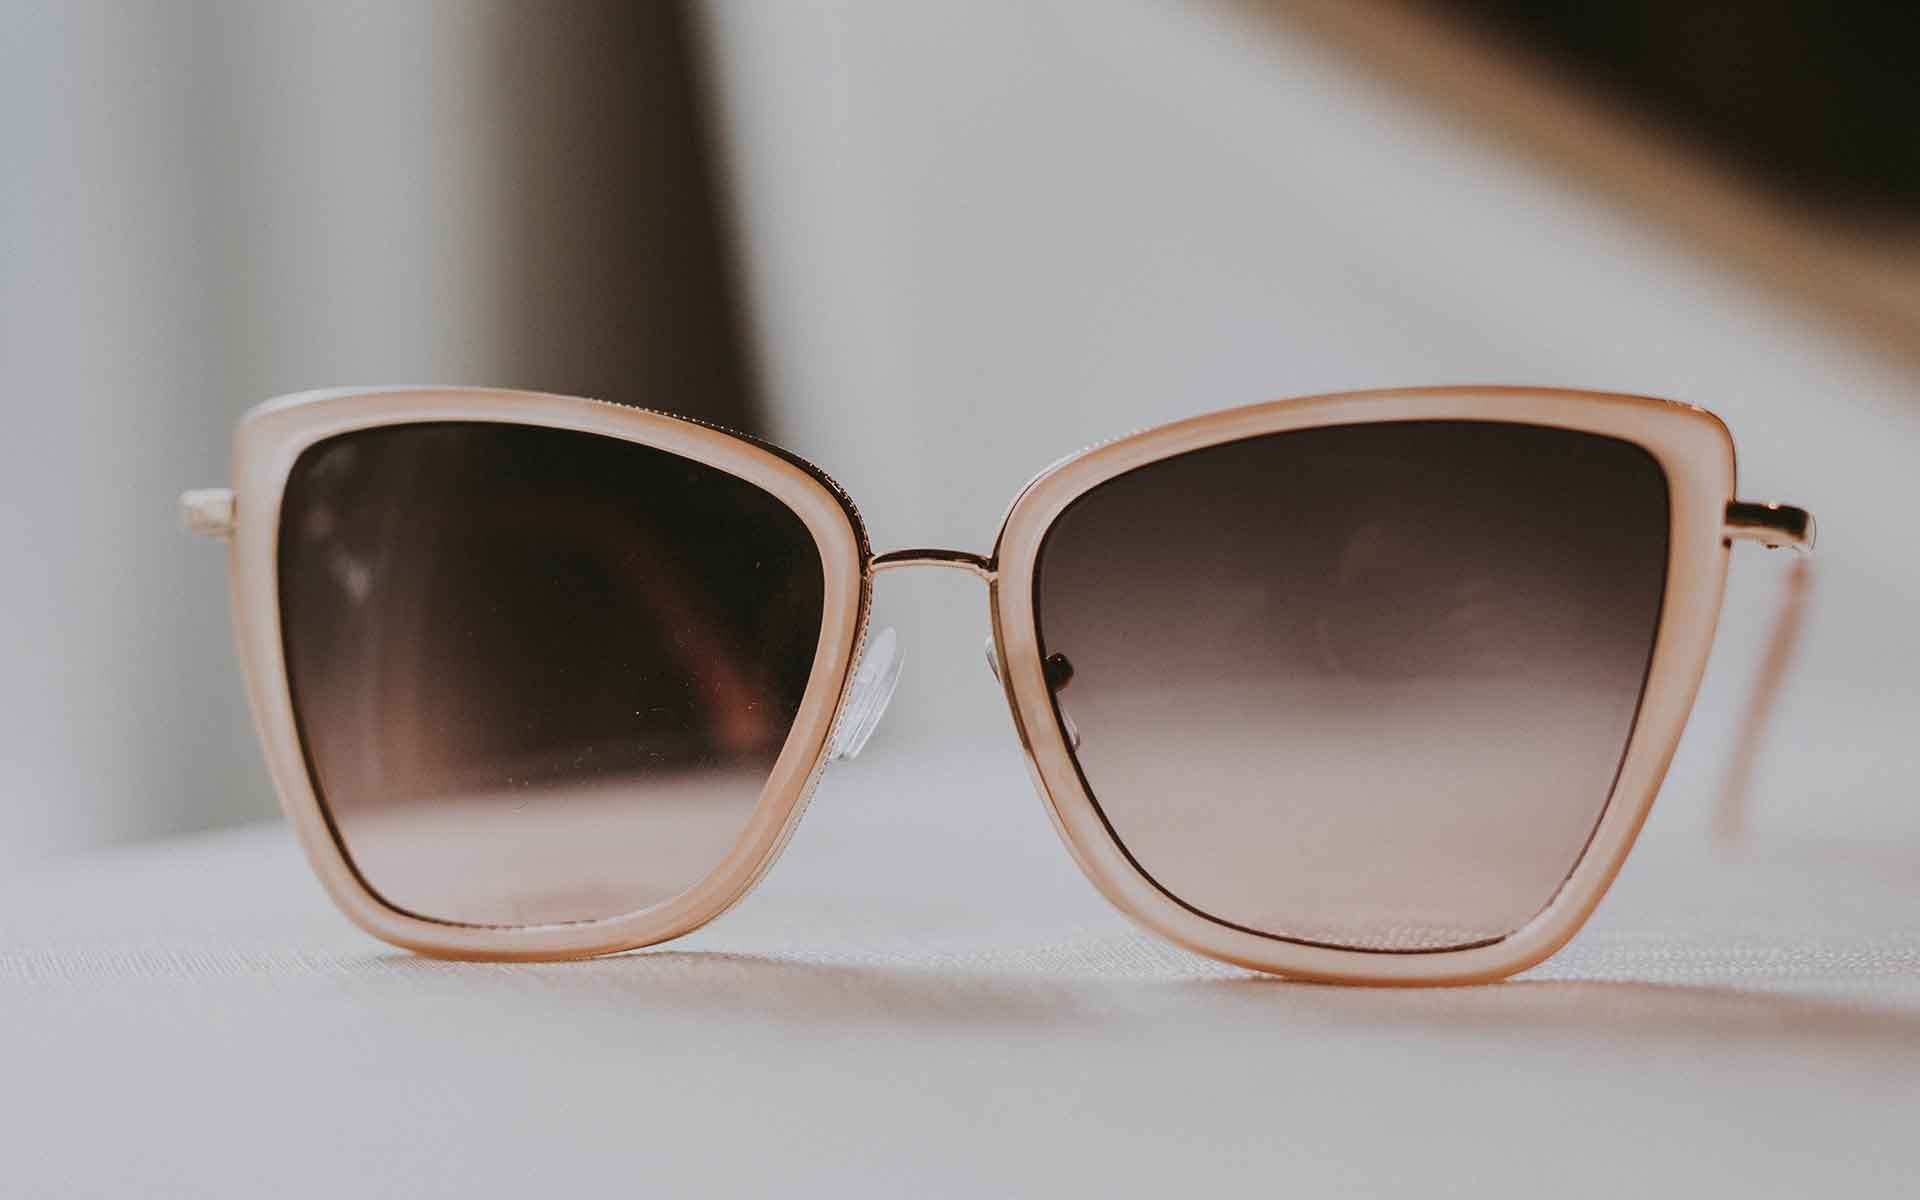 Tips for Buying New Sunglasses - Blog Sunglass Fix